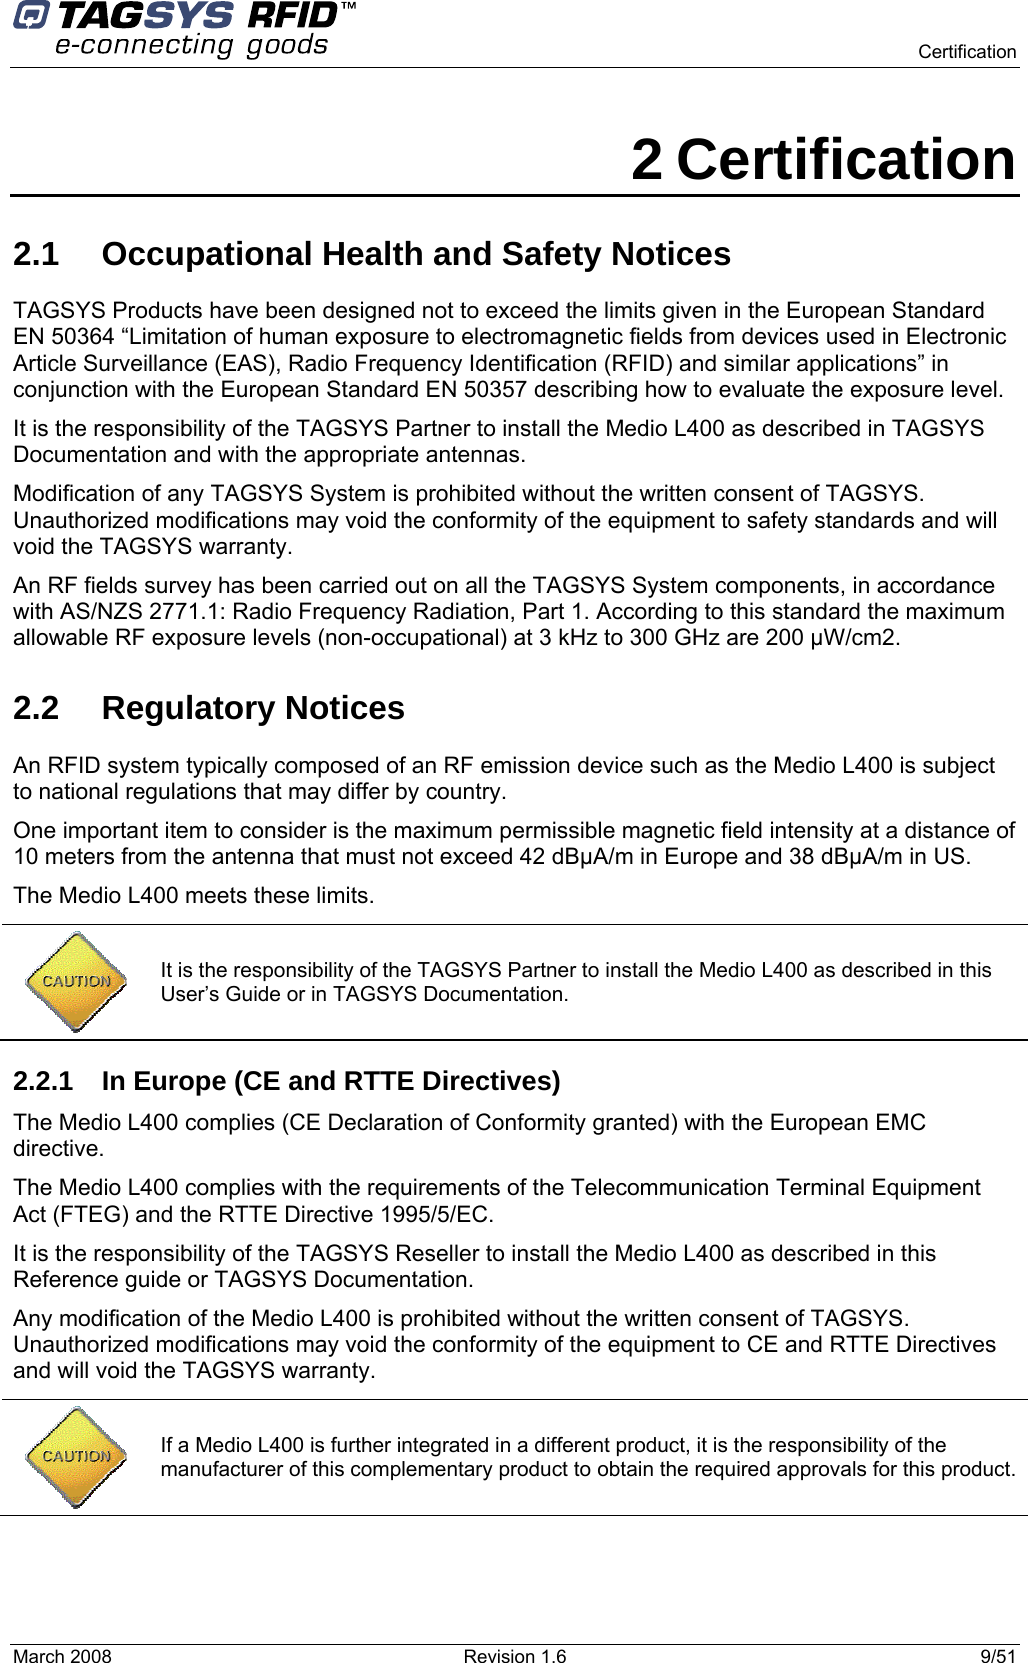      Certification March 2008  Revision 1.6  9/51  2 Certification 2.1  Occupational Health and Safety Notices TAGSYS Products have been designed not to exceed the limits given in the European Standard EN 50364 “Limitation of human exposure to electromagnetic fields from devices used in Electronic Article Surveillance (EAS), Radio Frequency Identification (RFID) and similar applications” in conjunction with the European Standard EN 50357 describing how to evaluate the exposure level. It is the responsibility of the TAGSYS Partner to install the Medio L400 as described in TAGSYS Documentation and with the appropriate antennas.  Modification of any TAGSYS System is prohibited without the written consent of TAGSYS. Unauthorized modifications may void the conformity of the equipment to safety standards and will void the TAGSYS warranty. An RF fields survey has been carried out on all the TAGSYS System components, in accordance with AS/NZS 2771.1: Radio Frequency Radiation, Part 1. According to this standard the maximum allowable RF exposure levels (non-occupational) at 3 kHz to 300 GHz are 200 µW/cm2.  2.2 Regulatory Notices An RFID system typically composed of an RF emission device such as the Medio L400 is subject to national regulations that may differ by country. One important item to consider is the maximum permissible magnetic field intensity at a distance of 10 meters from the antenna that must not exceed 42 dBµA/m in Europe and 38 dBµA/m in US. The Medio L400 meets these limits.  2.2.1  In Europe (CE and RTTE Directives)  The Medio L400 complies (CE Declaration of Conformity granted) with the European EMC directive. The Medio L400 complies with the requirements of the Telecommunication Terminal Equipment Act (FTEG) and the RTTE Directive 1995/5/EC. It is the responsibility of the TAGSYS Reseller to install the Medio L400 as described in this Reference guide or TAGSYS Documentation. Any modification of the Medio L400 is prohibited without the written consent of TAGSYS. Unauthorized modifications may void the conformity of the equipment to CE and RTTE Directives and will void the TAGSYS warranty.   It is the responsibility of the TAGSYS Partner to install the Medio L400 as described in this User’s Guide or in TAGSYS Documentation.  If a Medio L400 is further integrated in a different product, it is the responsibility of the manufacturer of this complementary product to obtain the required approvals for this product. 